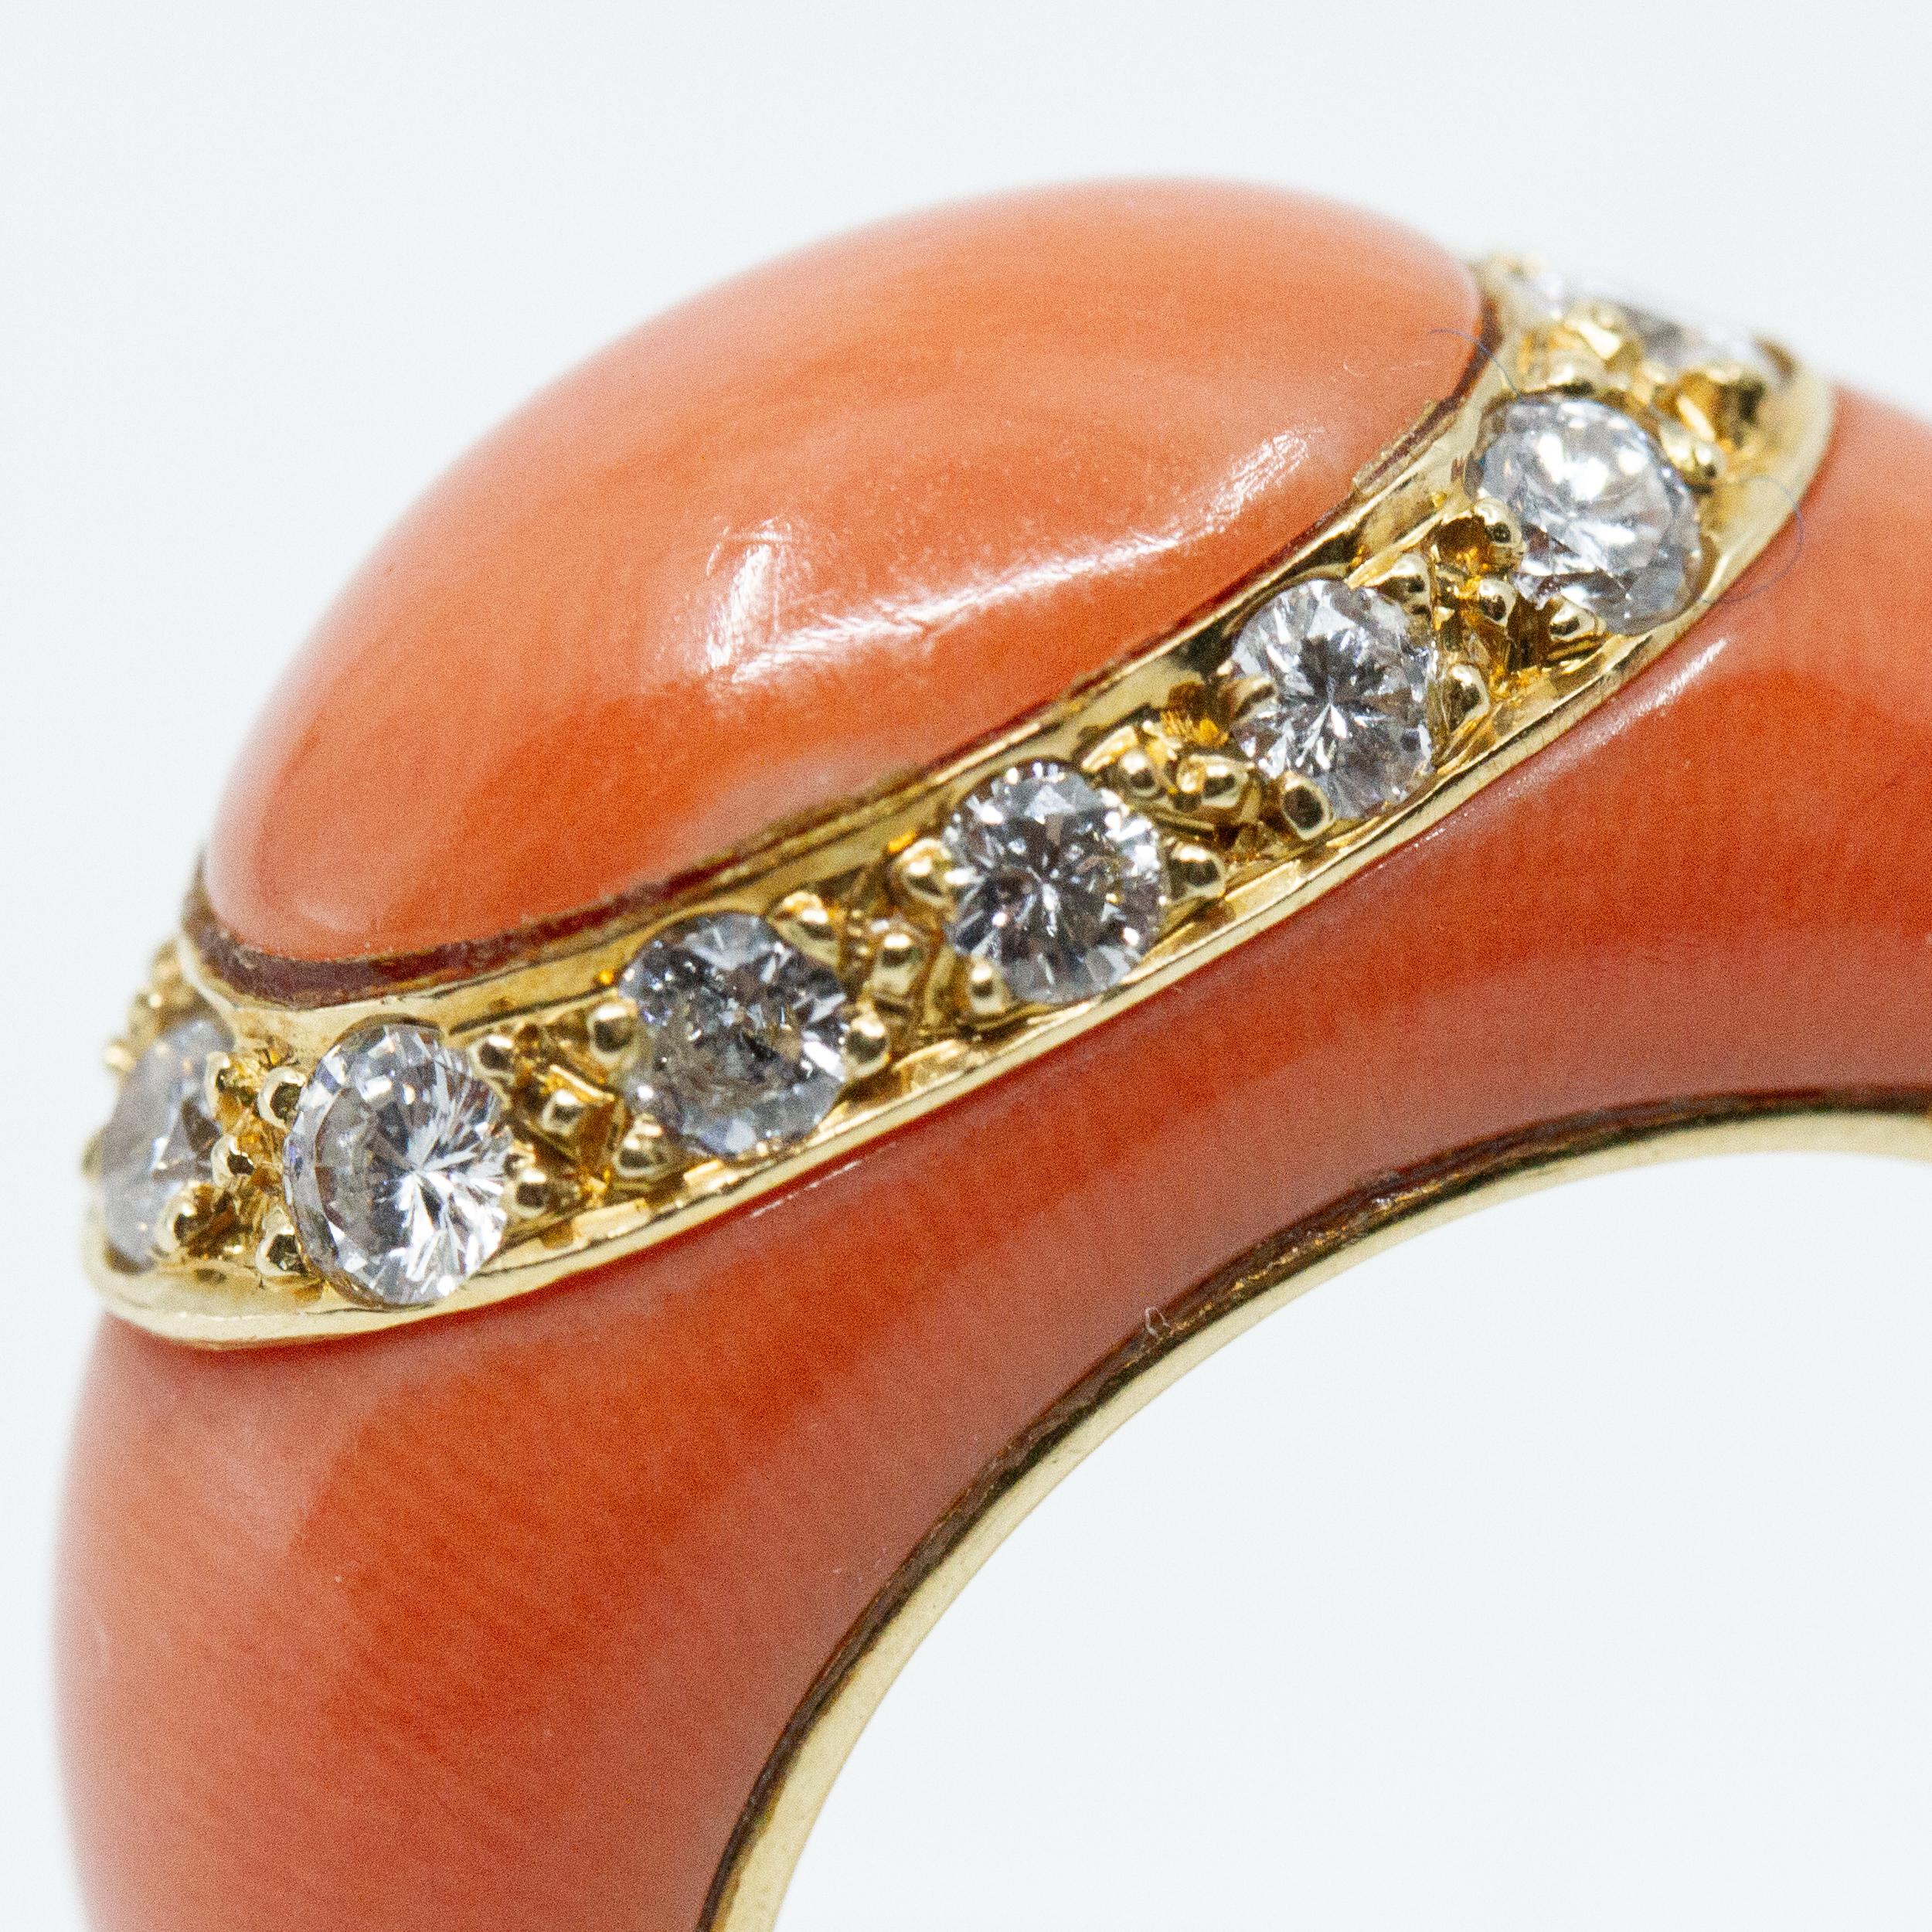 Van Cleef & Arpel 18kt yellow gold ring with carved salmon colored coral, accented with brilliant cut diamonds. Stamped: VCA 750 Made in France, French Assay Marks 5V63812. Approx. diamond weight .60ct, H-VS1, weighs 7.8 grams, size 4.5. 
About